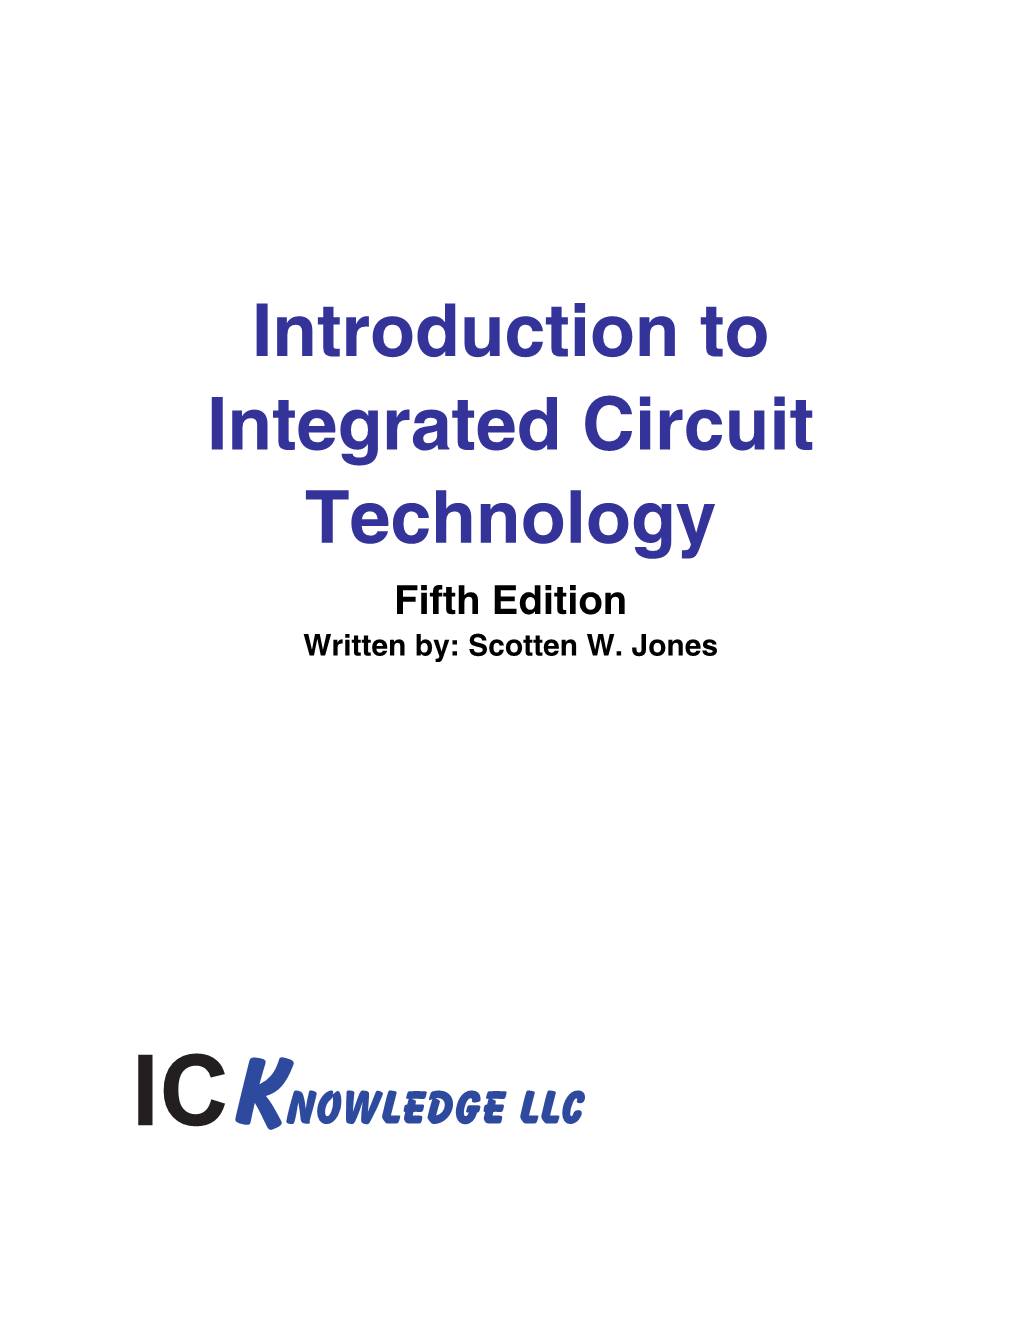 Introduction to IC Technology, and That Is the Objec- Tive of This Publication